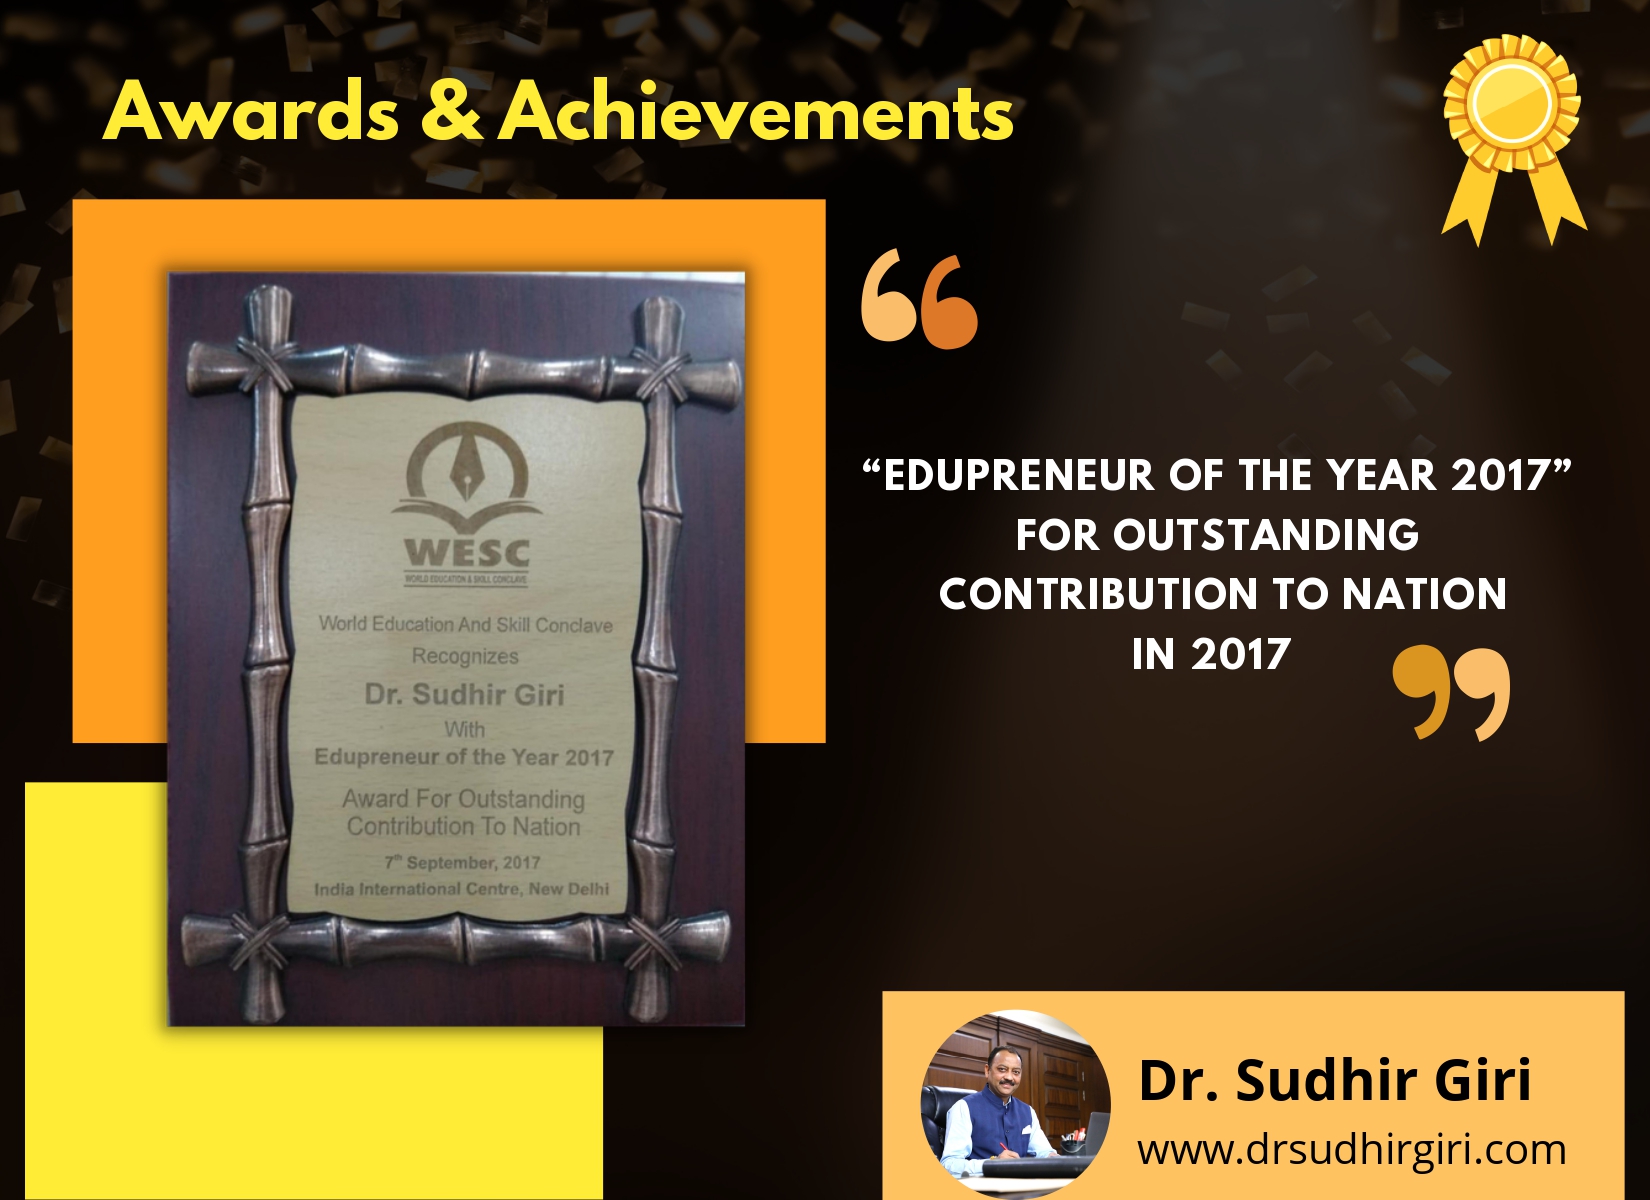 Dr Giri - “Edupreneur of the Year 2017” FOR OUTSTANDING CONTRIBUTION TO NATION in 2017